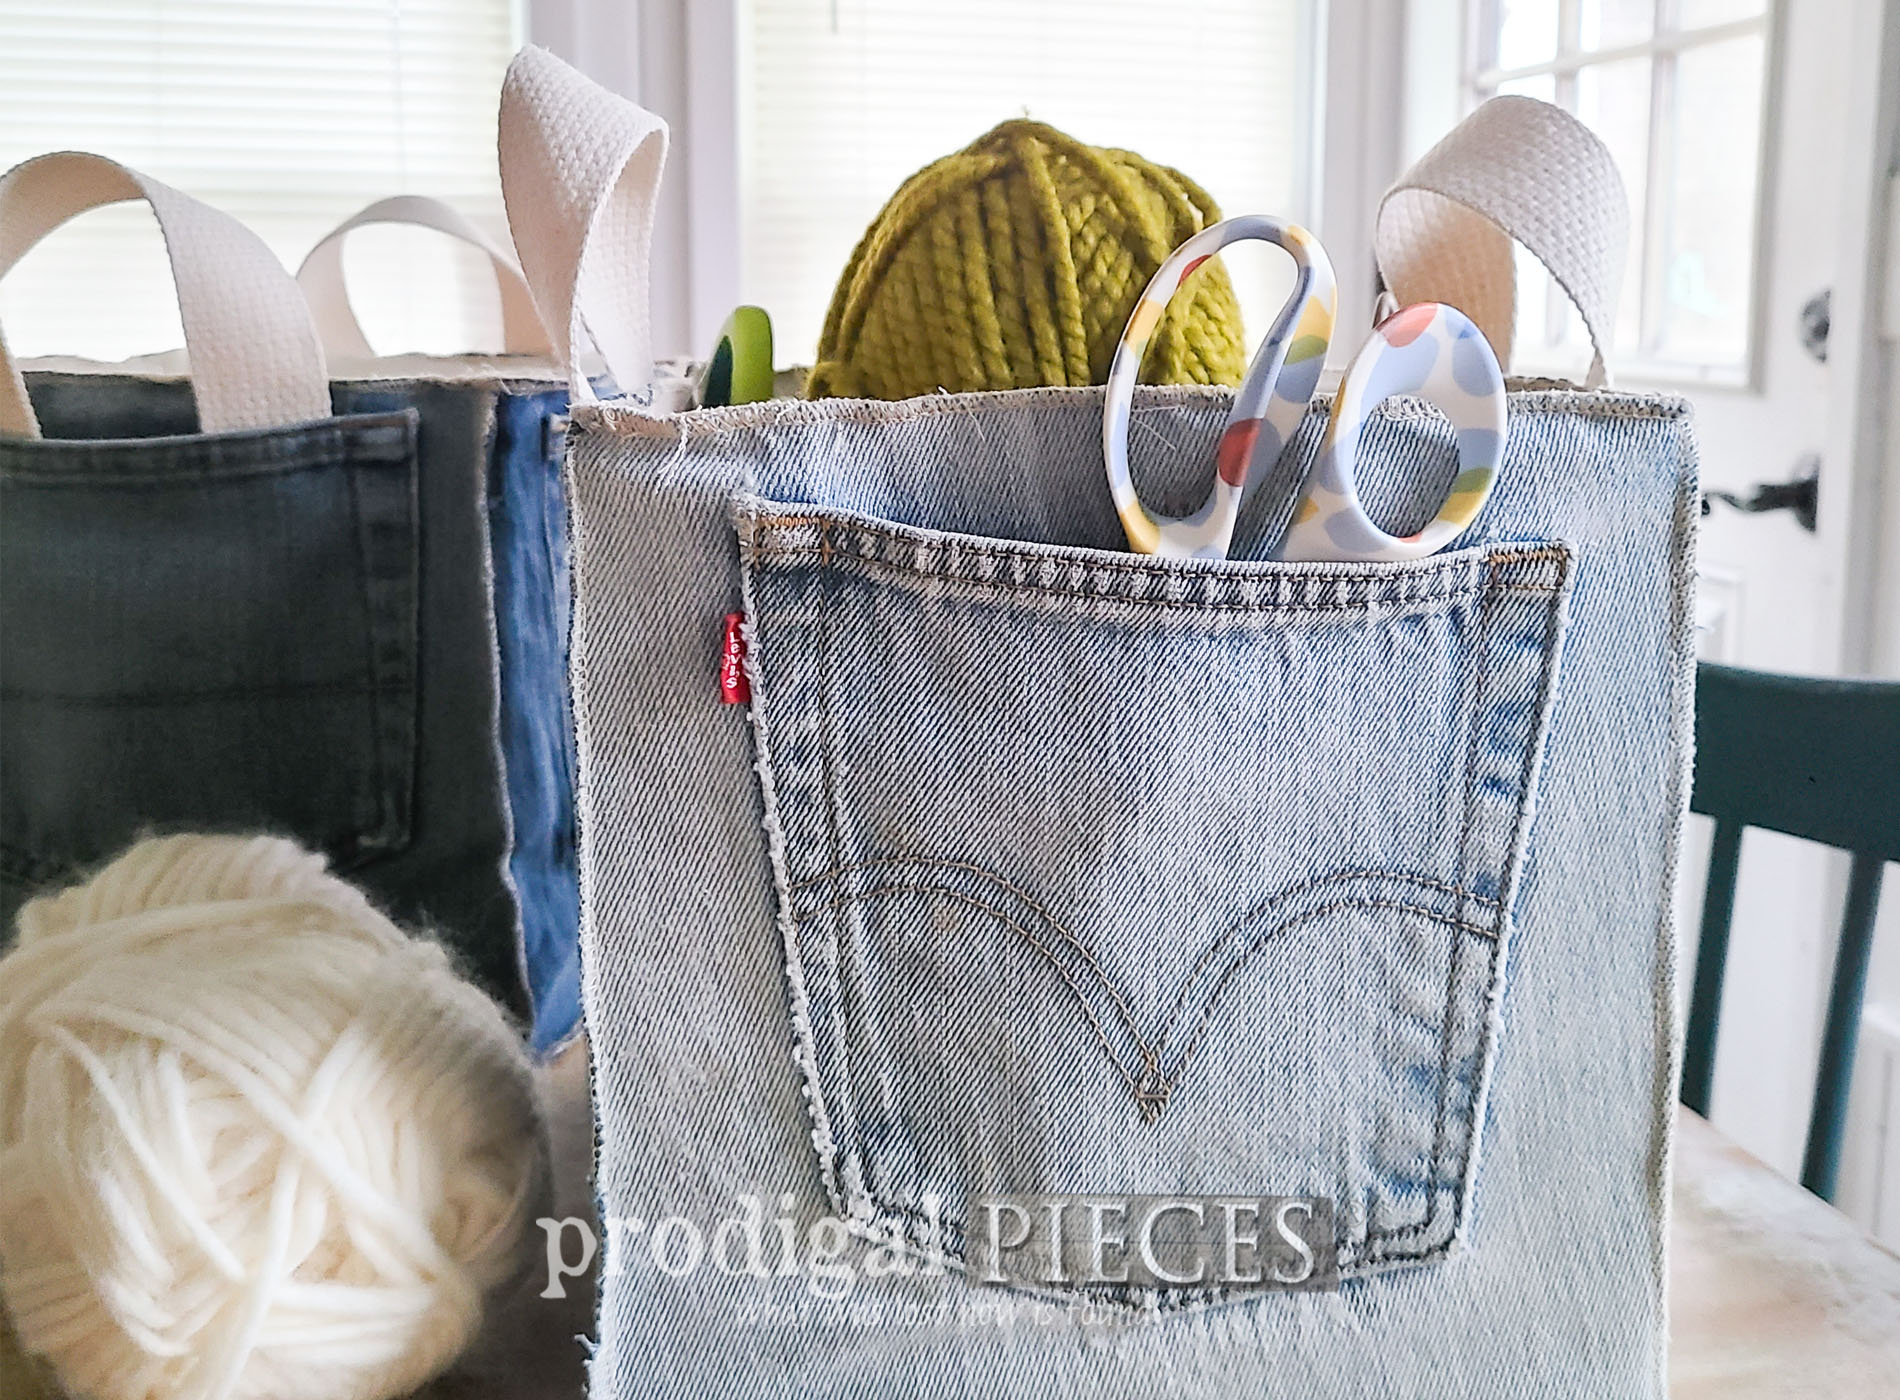 Featured Upcycled Jean Storage Bucket with Tutorial by Larissa of Prodigal Pieces | prodigalpieces.com #prodigalpieces #refashion #upcycle #diy #upcycled